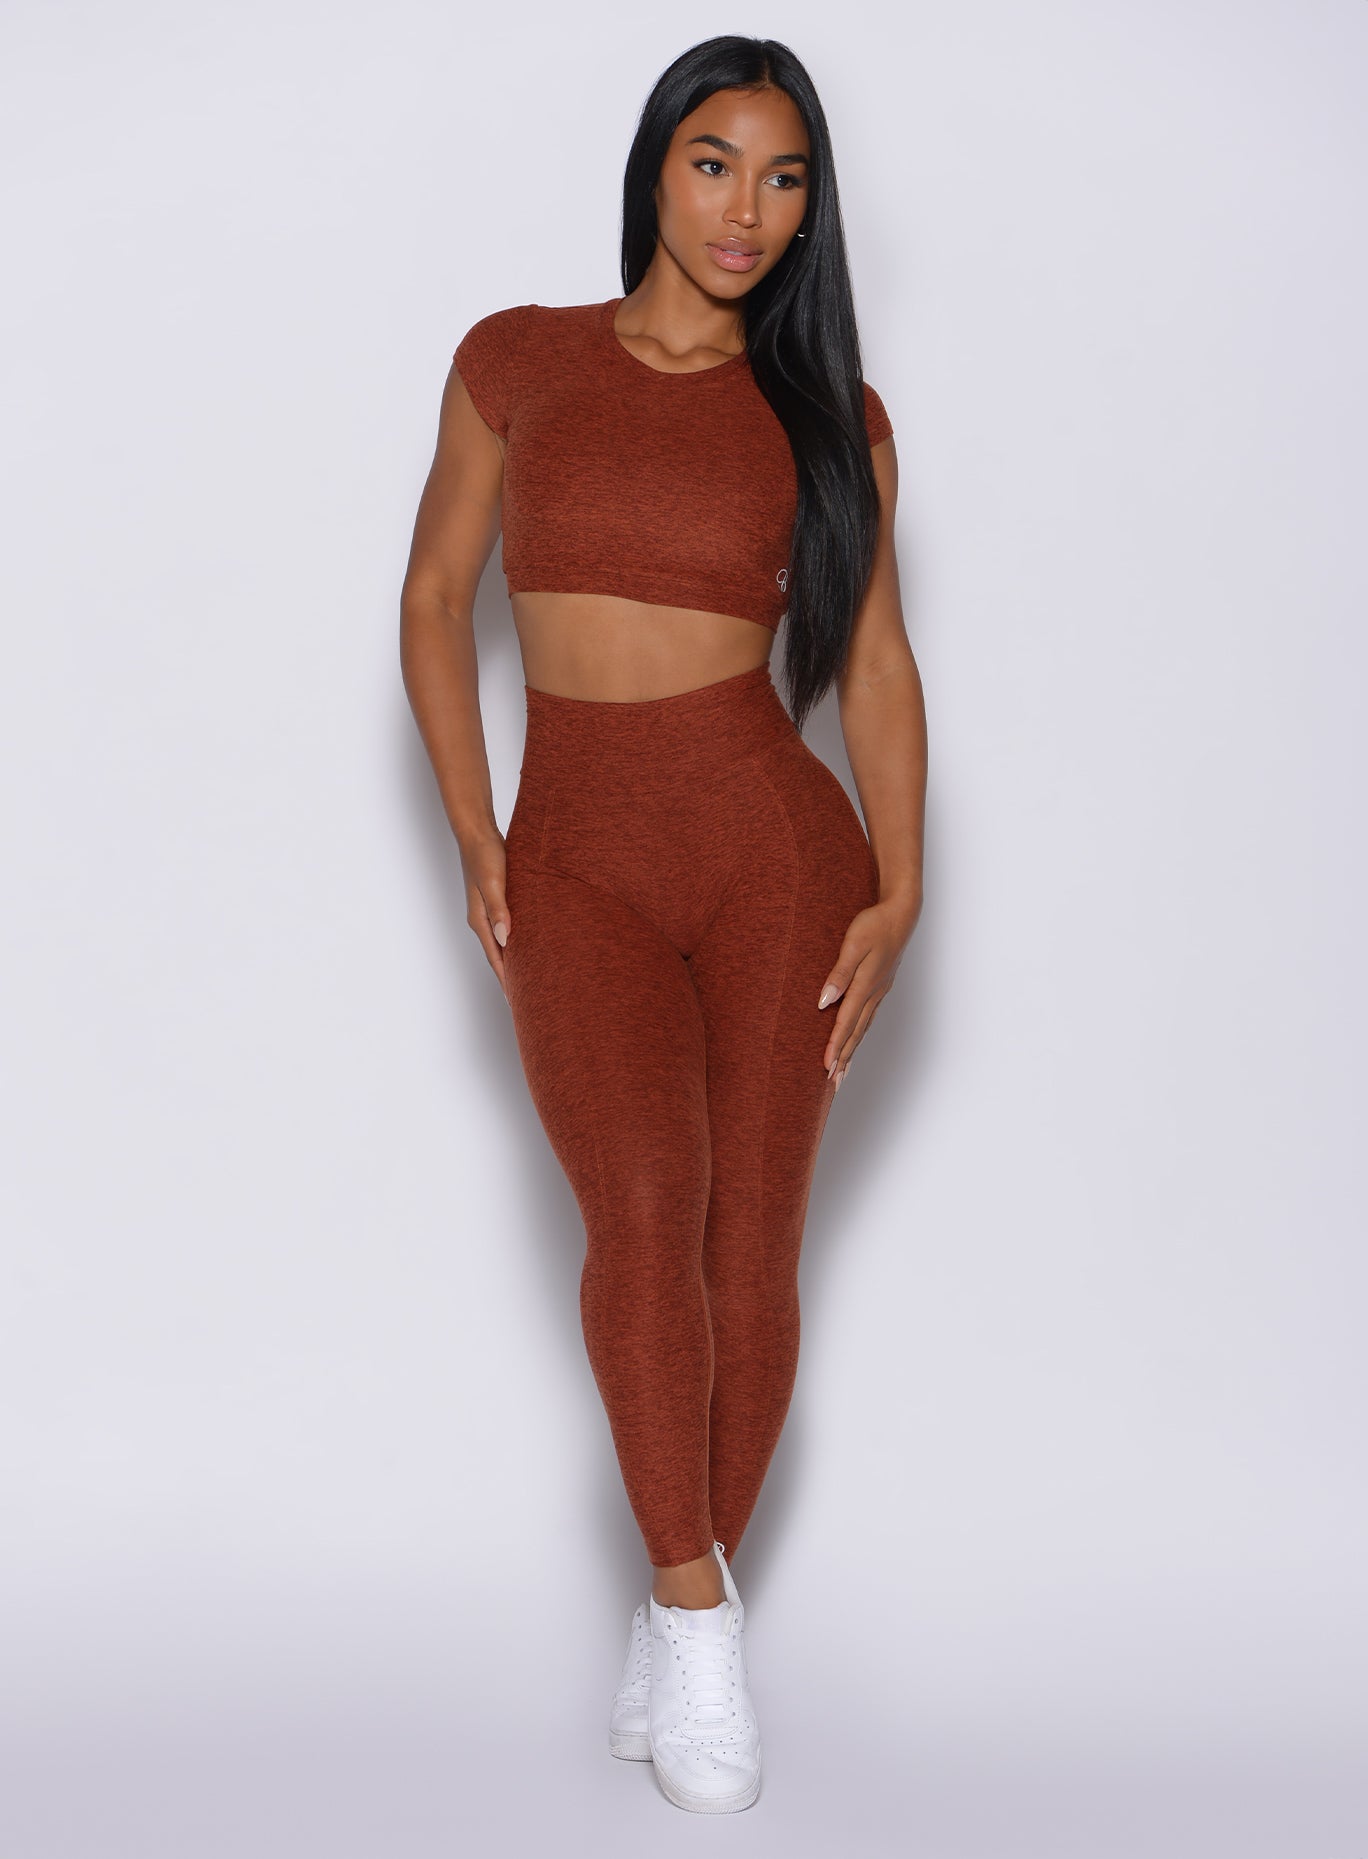 Front profile view of a model in our cloud leggings in Cinnamon color and a matching top